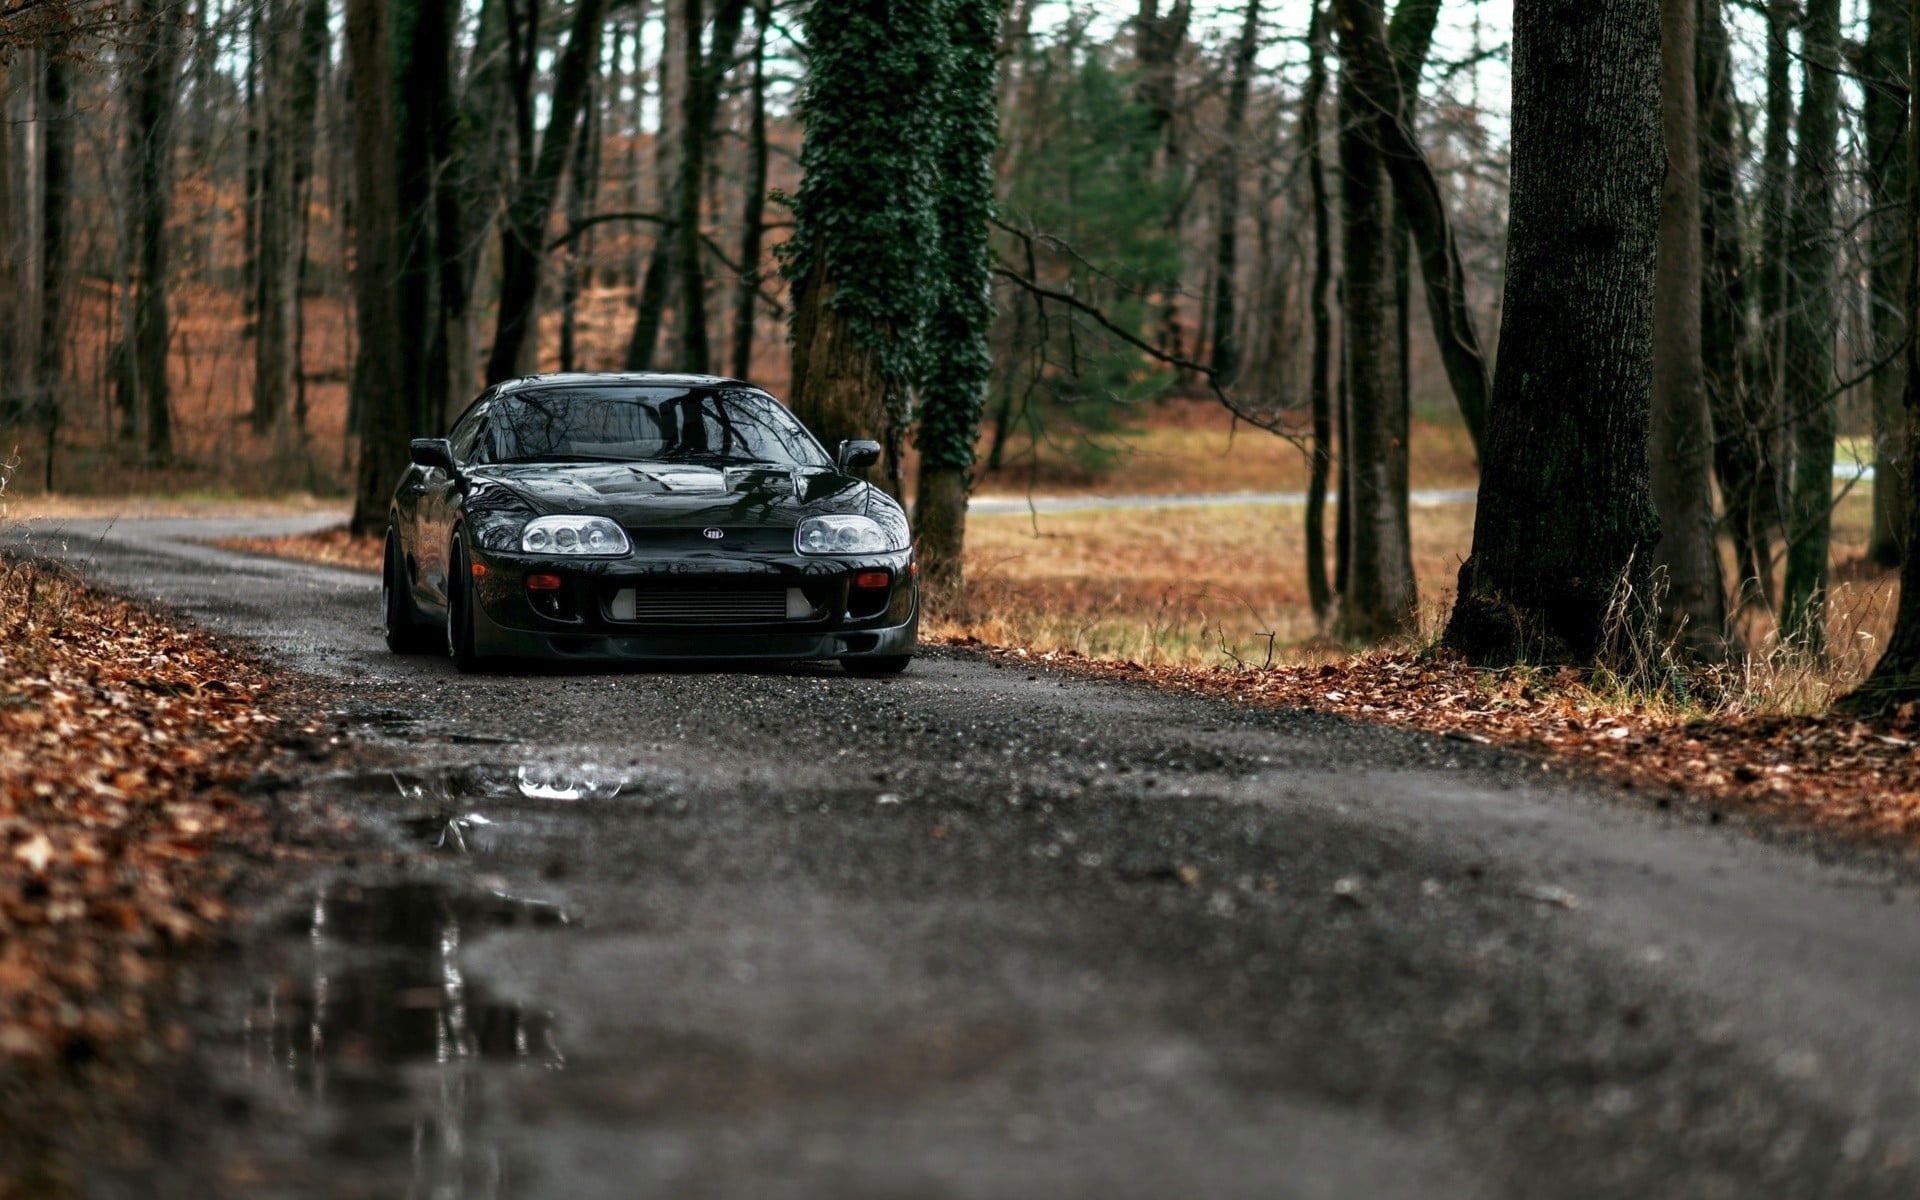 A black sports car driving down a leaf covered road in the woods. - JDM